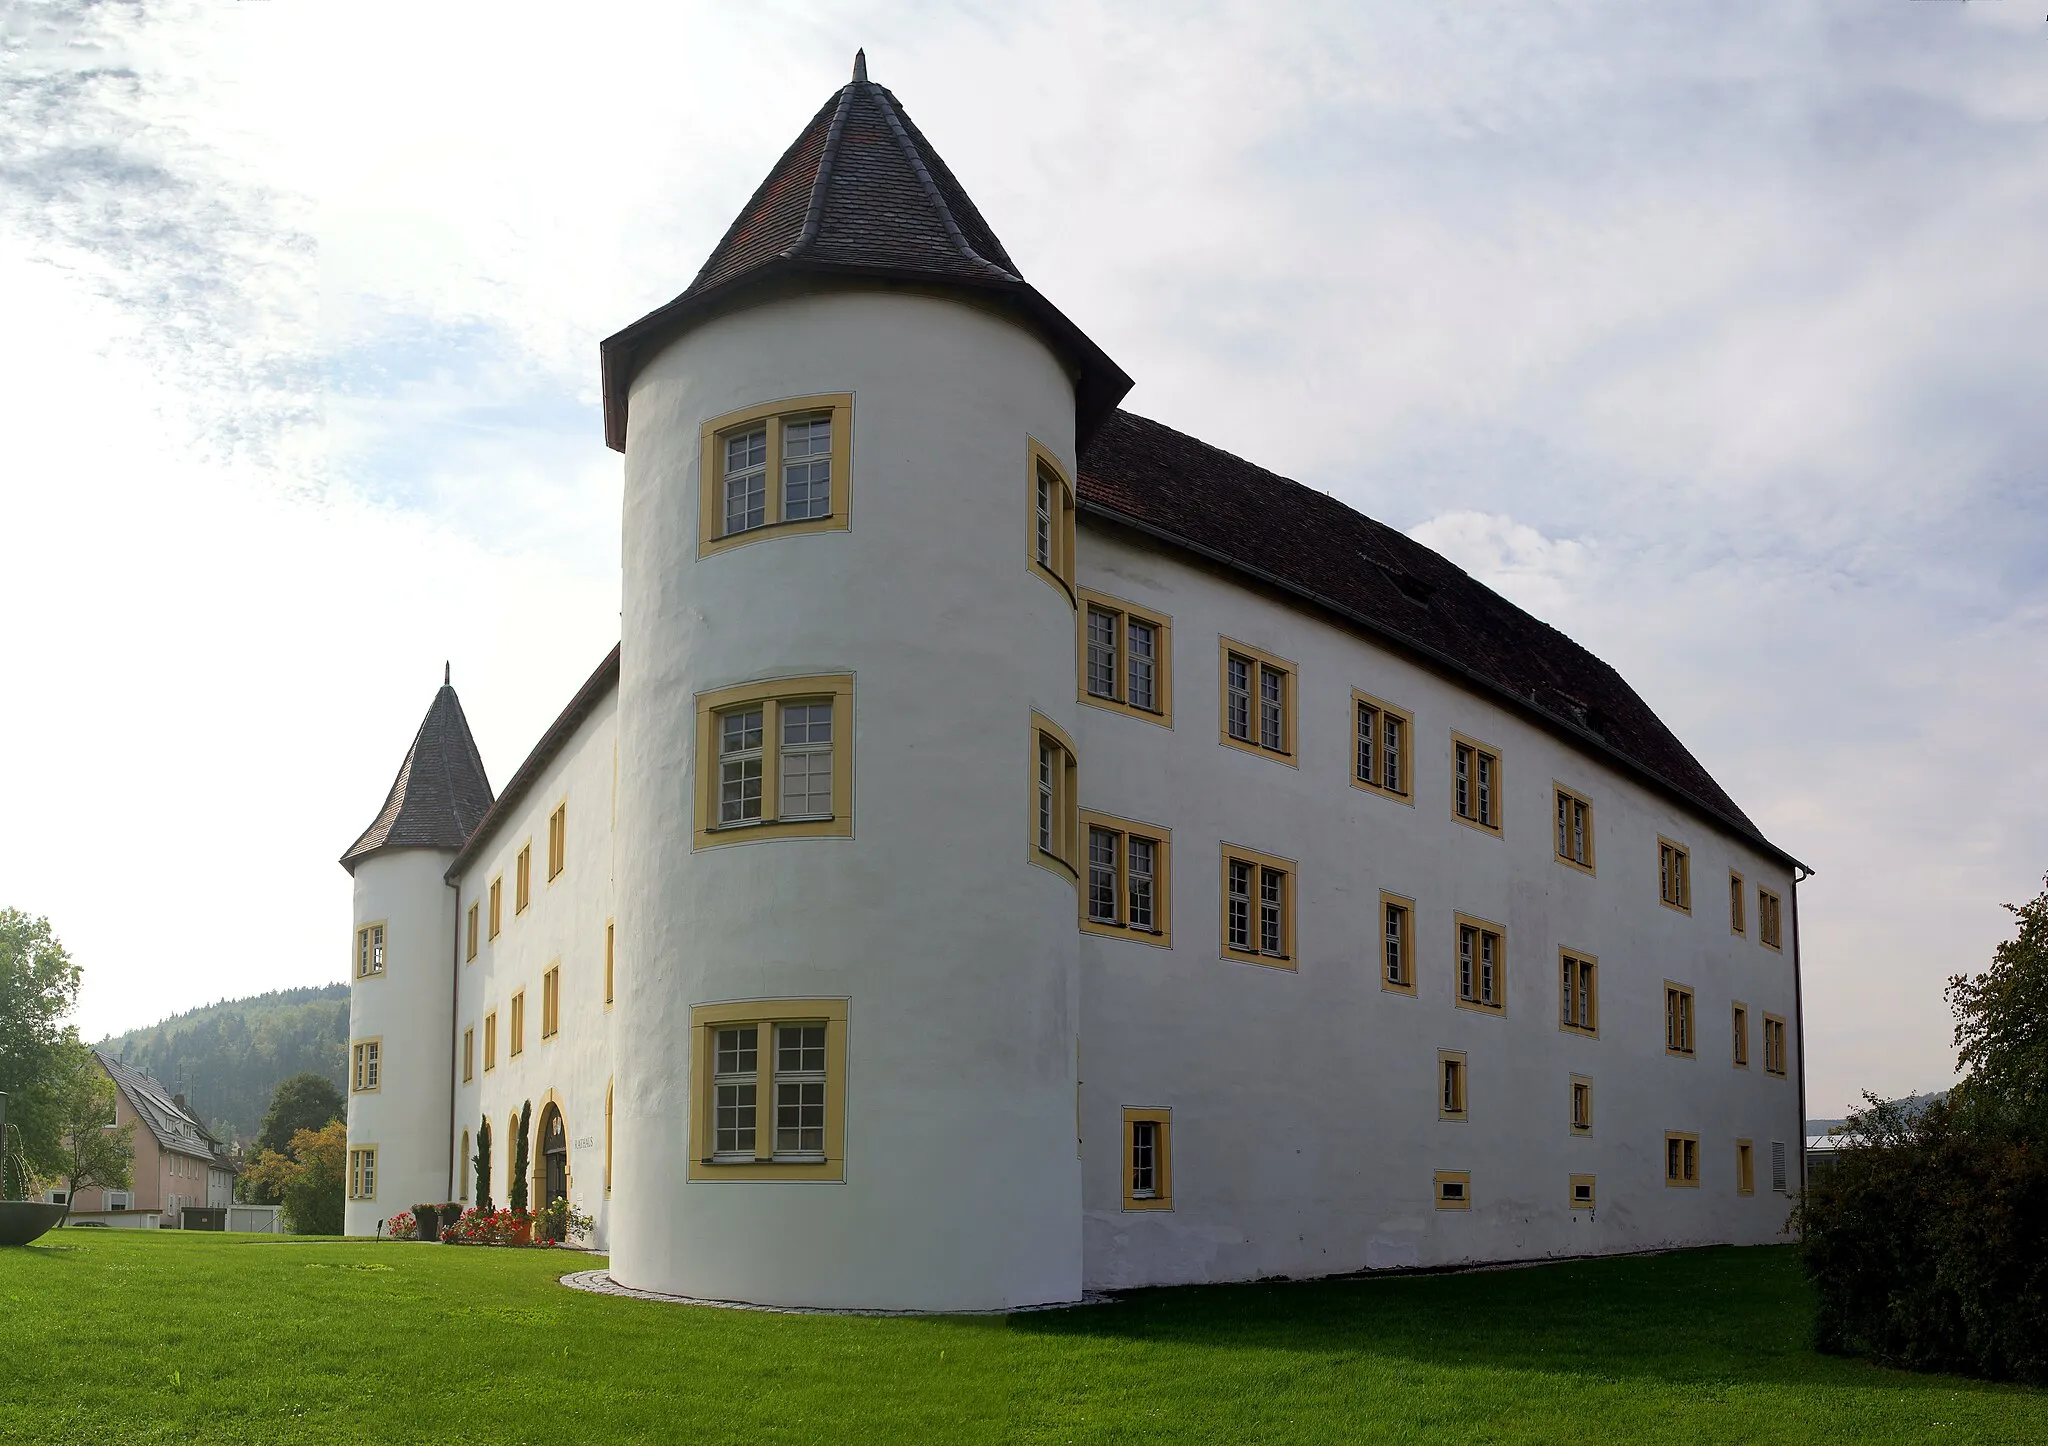 Photo showing: "Oberes Schloss" (used as Cityhall) of Immendingen